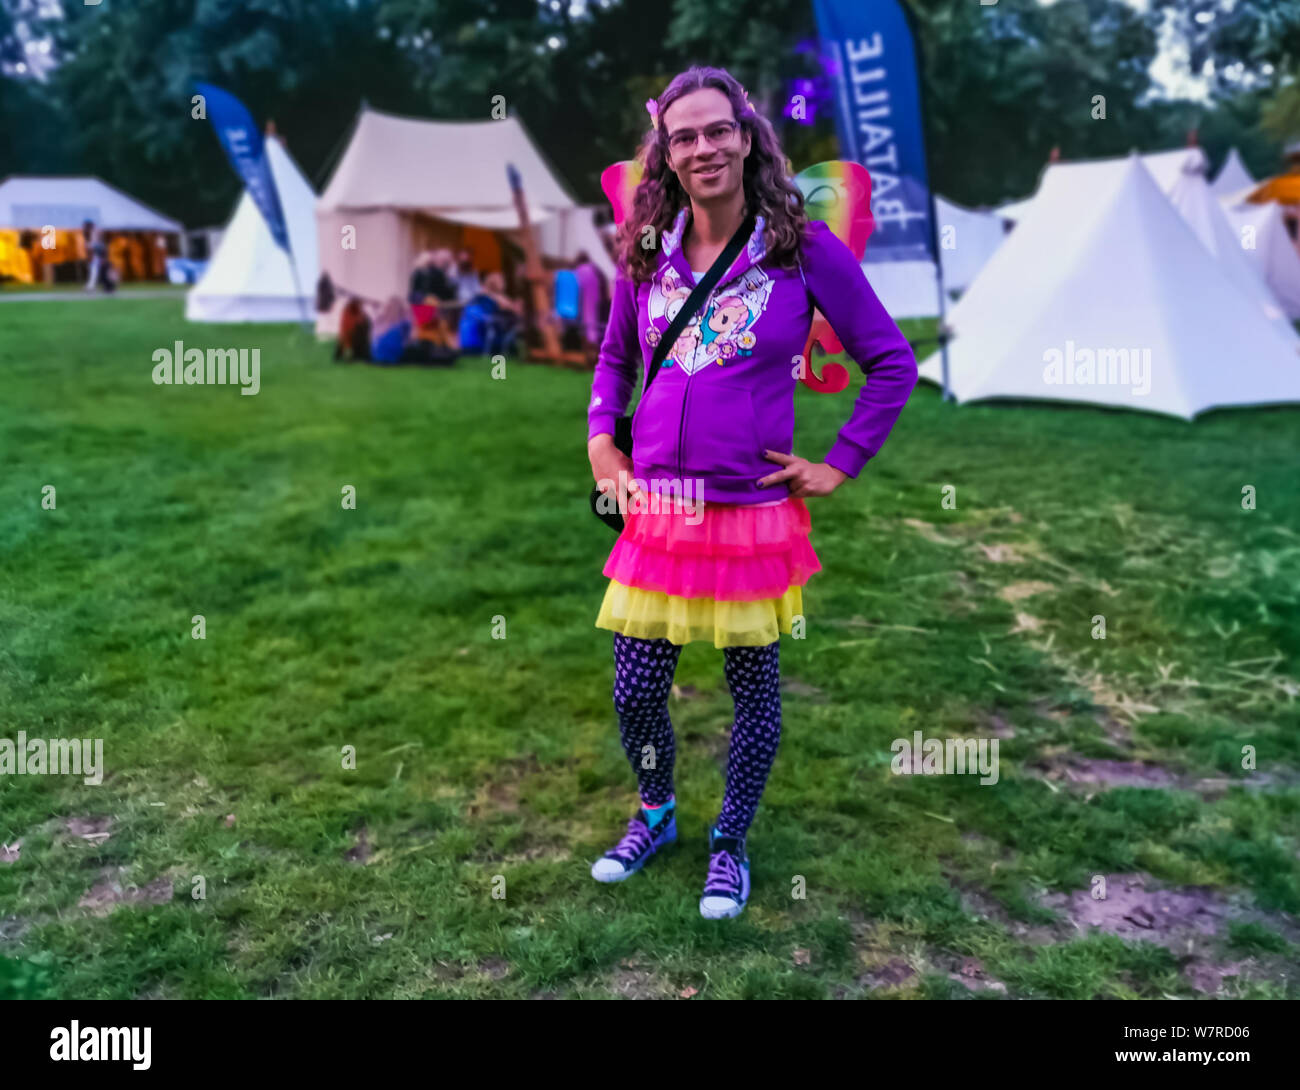 LGBT portrait of a person wearing a colorful outfit with butterfly wings, castlefest festival 2 august, 2019, keukenhof, lisse, The netherlands Stock Photo